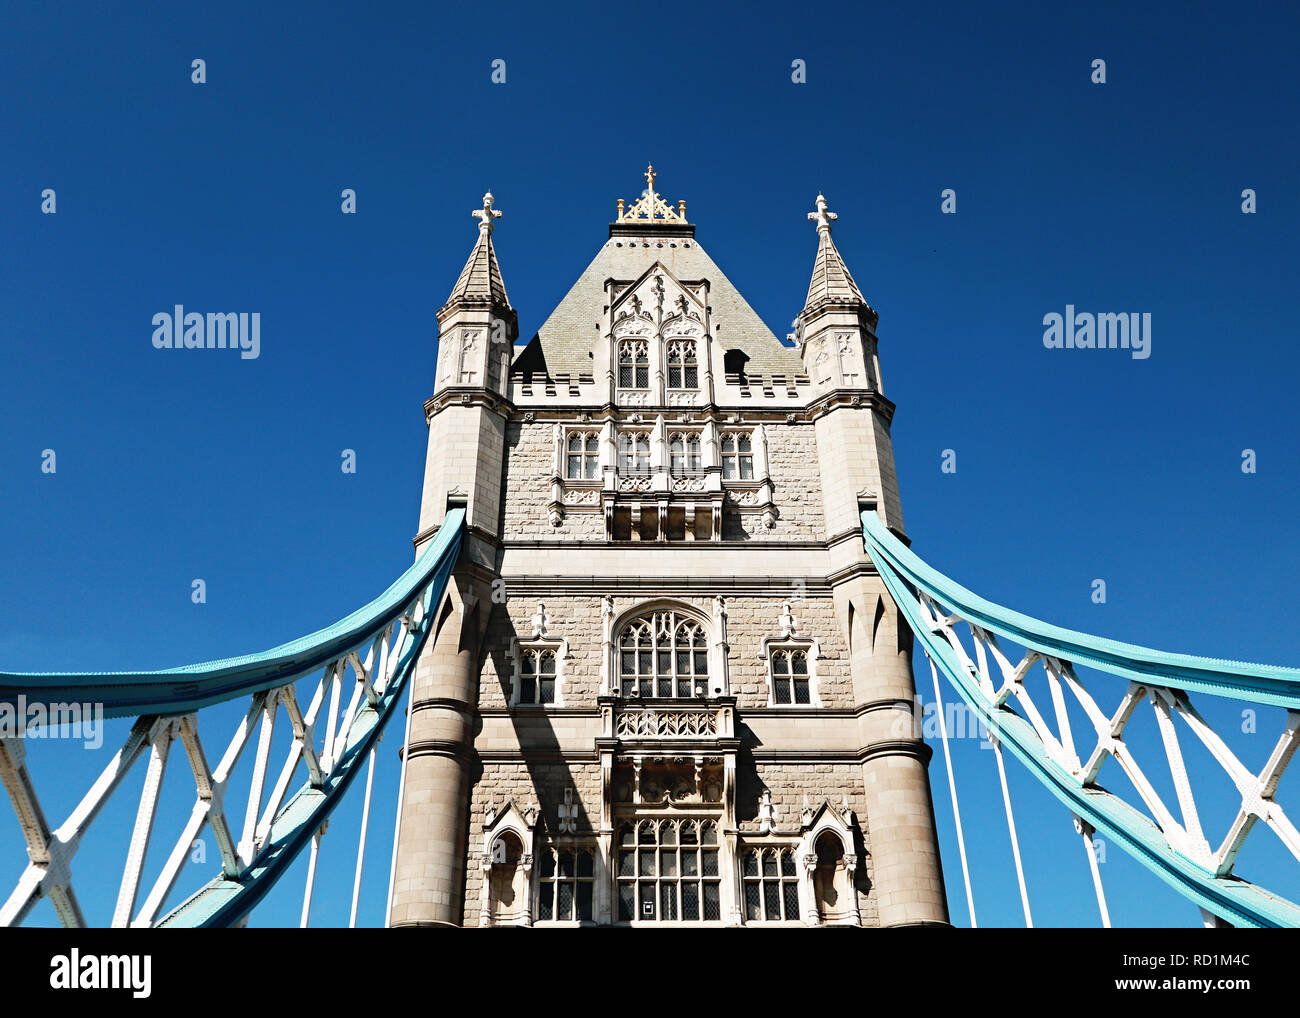 Close-up of a tower on Tower Bridge, London, United Kingdom Stock Photo